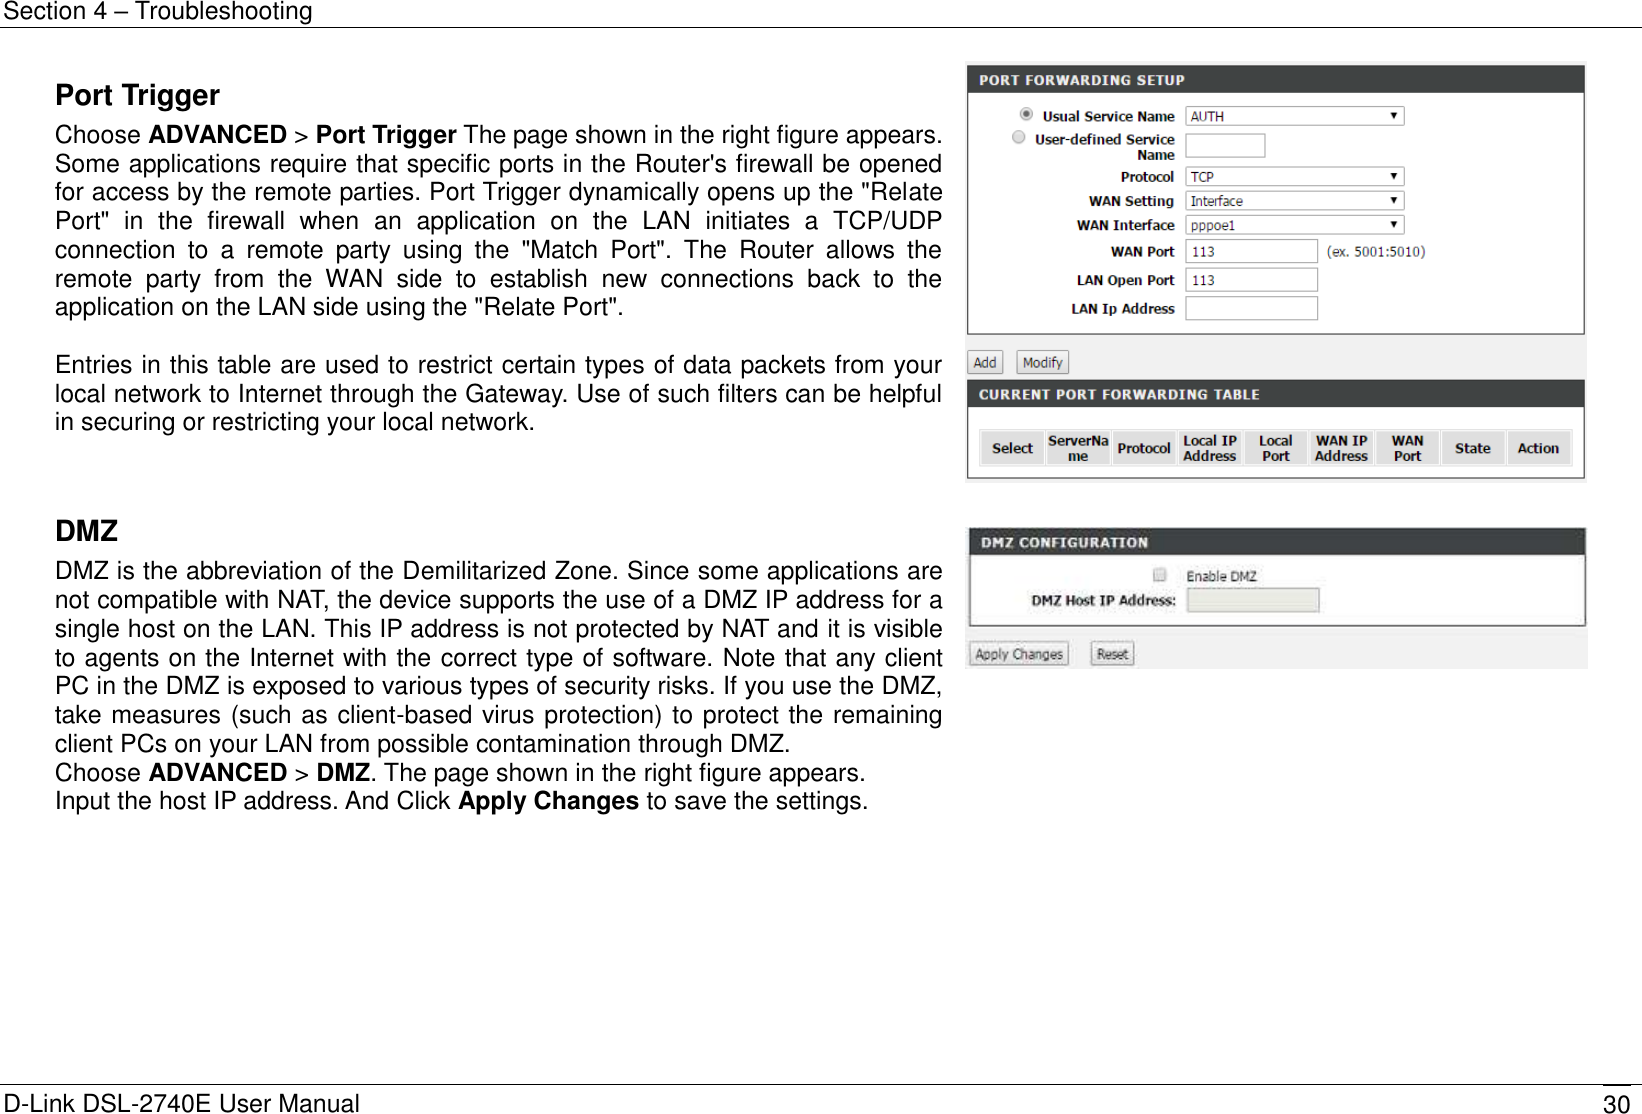 Section 4 – Troubleshooting D-Link DSL-2740E User Manual 30 Port Trigger Choose ADVANCED &gt; Port Trigger The page shown in the right figure appears. Some applications require that specific ports in the Router&apos;s firewall be opened for access by the remote parties. Port Trigger dynamically opens up the &quot;Relate Port&quot;  in  the  firewall  when  an  application  on  the  LAN  initiates  a  TCP/UDP connection  to  a  remote  party  using  the  &quot;Match  Port&quot;.  The  Router  allows  the remote  party  from  the  WAN  side  to  establish  new  connections  back  to  the application on the LAN side using the &quot;Relate Port&quot;.  Entries in this table are used to restrict certain types of data packets from your local network to Internet through the Gateway. Use of such filters can be helpful in securing or restricting your local network.    DMZ DMZ is the abbreviation of the Demilitarized Zone. Since some applications are not compatible with NAT, the device supports the use of a DMZ IP address for a single host on the LAN. This IP address is not protected by NAT and it is visible to agents on the Internet with the correct type of software. Note that any client PC in the DMZ is exposed to various types of security risks. If you use the DMZ, take measures (such as client-based virus protection) to protect the remaining client PCs on your LAN from possible contamination through DMZ. Choose ADVANCED &gt; DMZ. The page shown in the right figure appears. Input the host IP address. And Click Apply Changes to save the settings.   